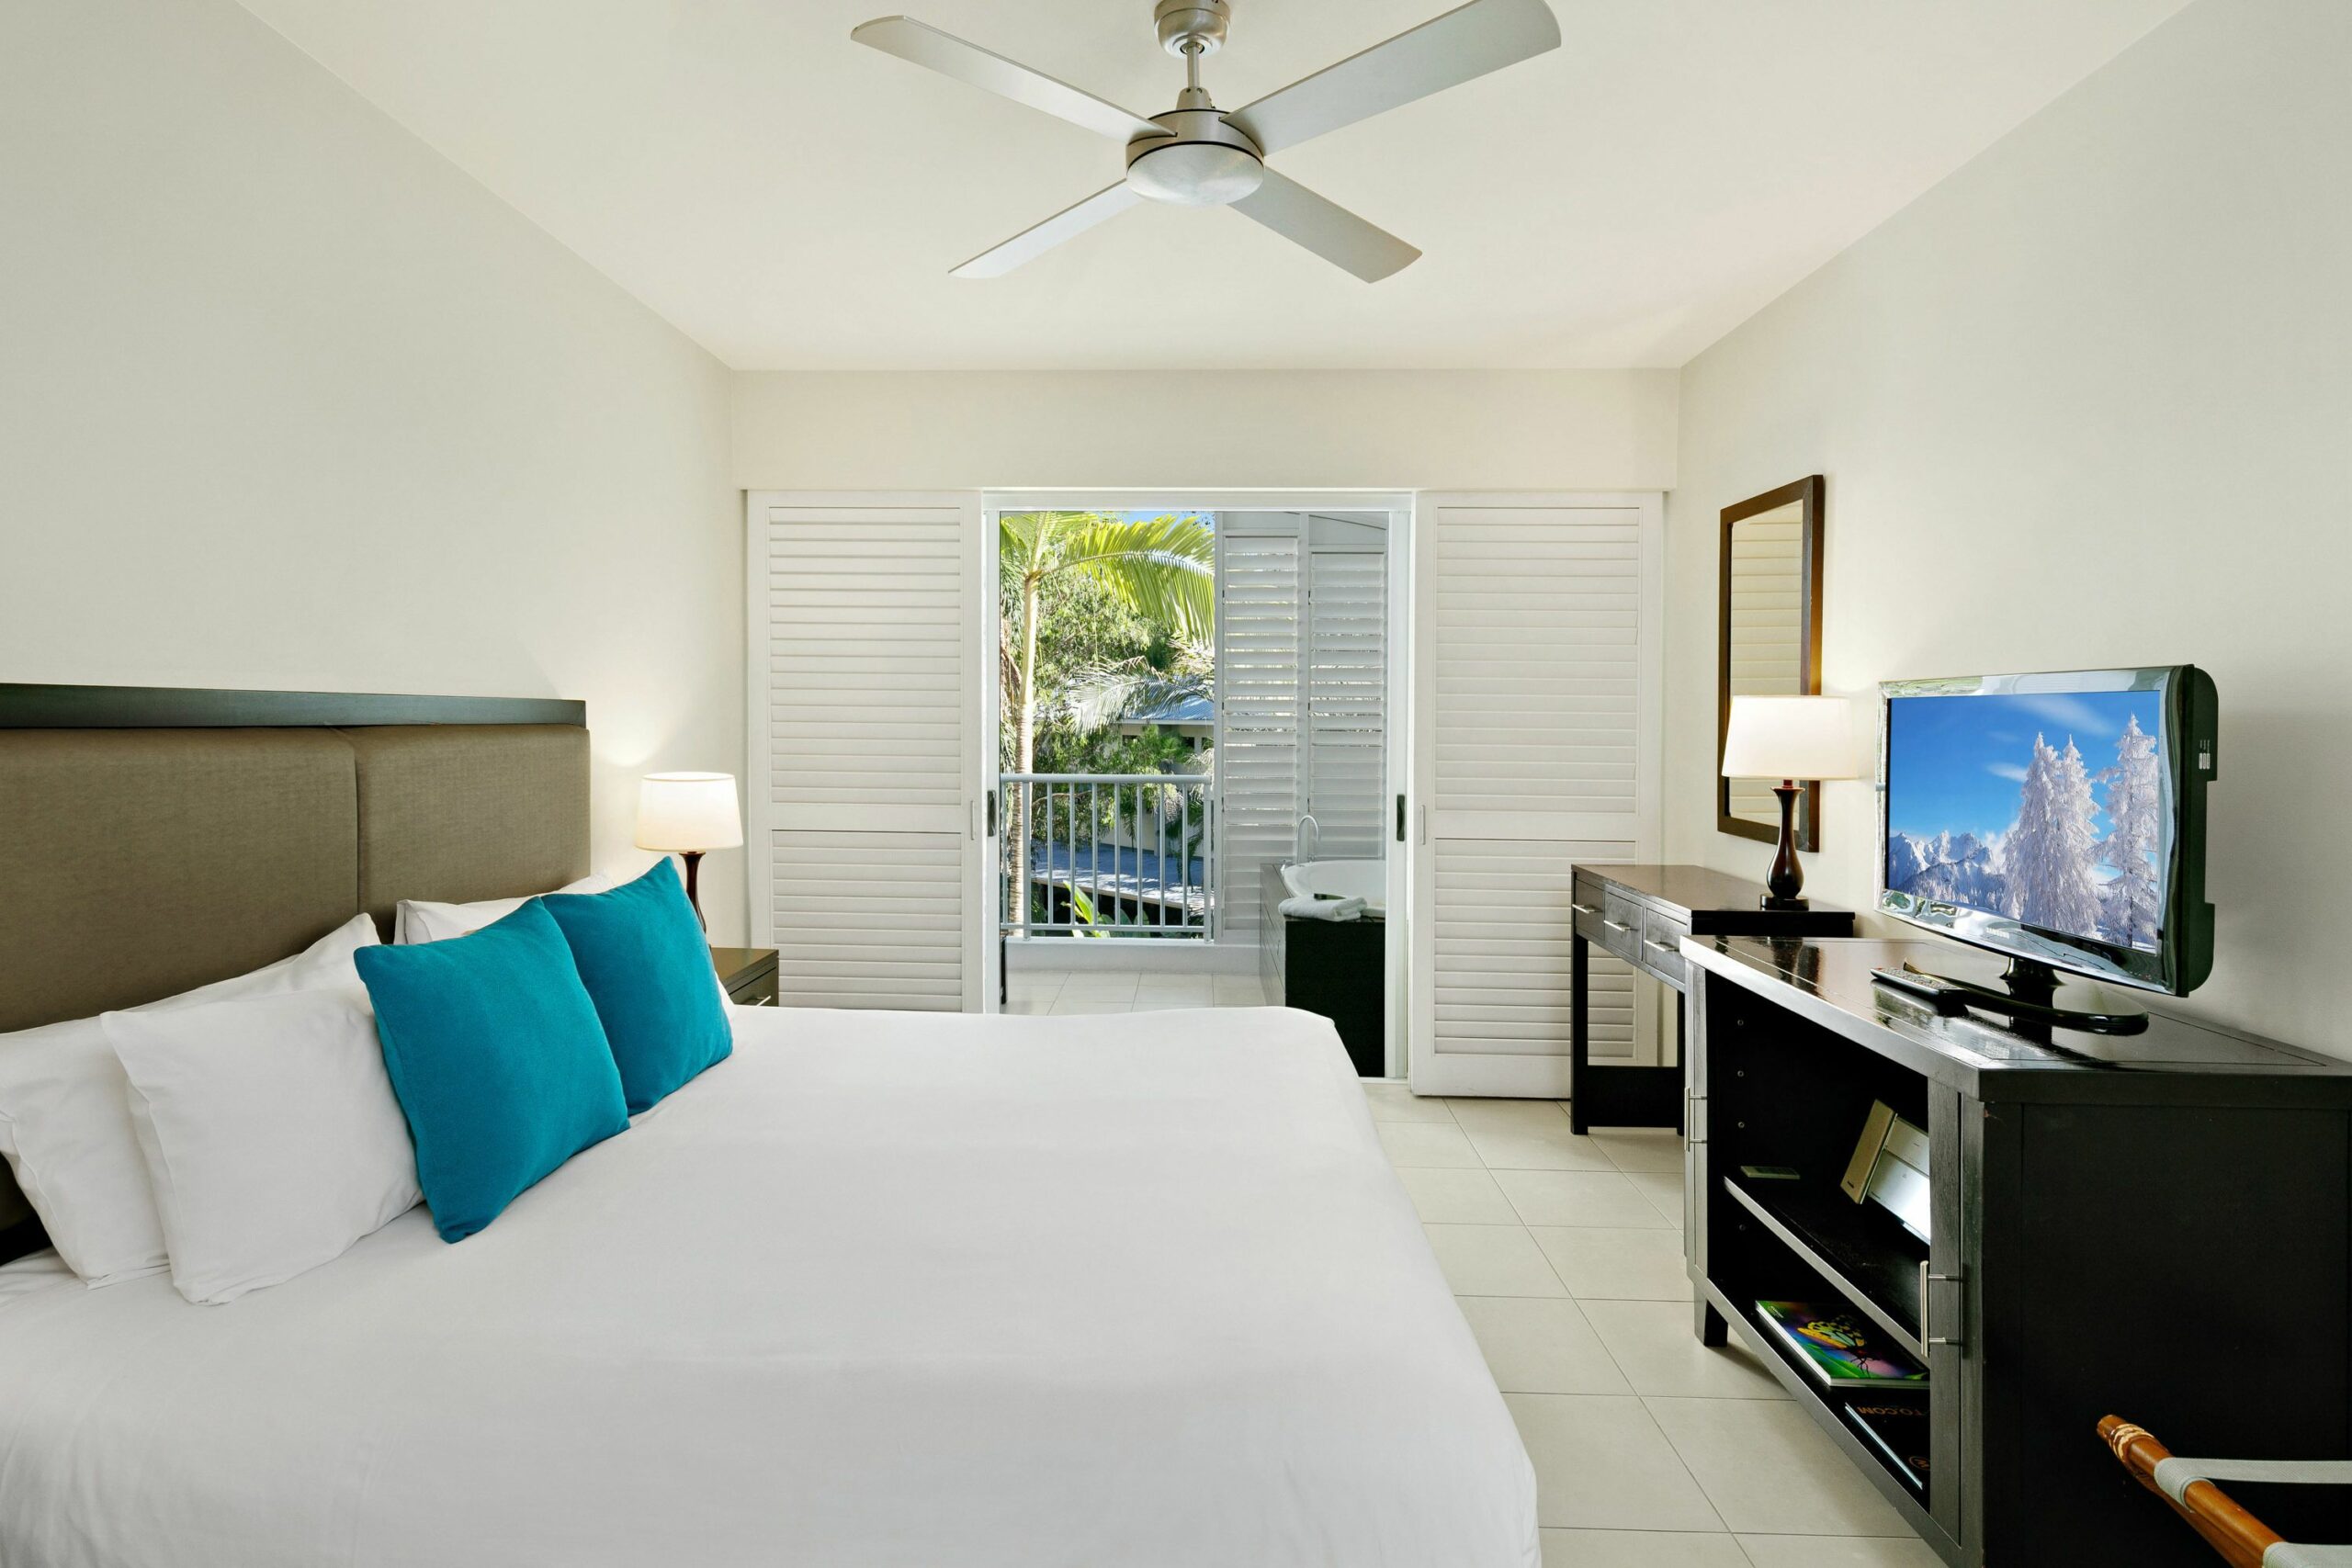 Peppers Beach Club and Spa - Palm Cove